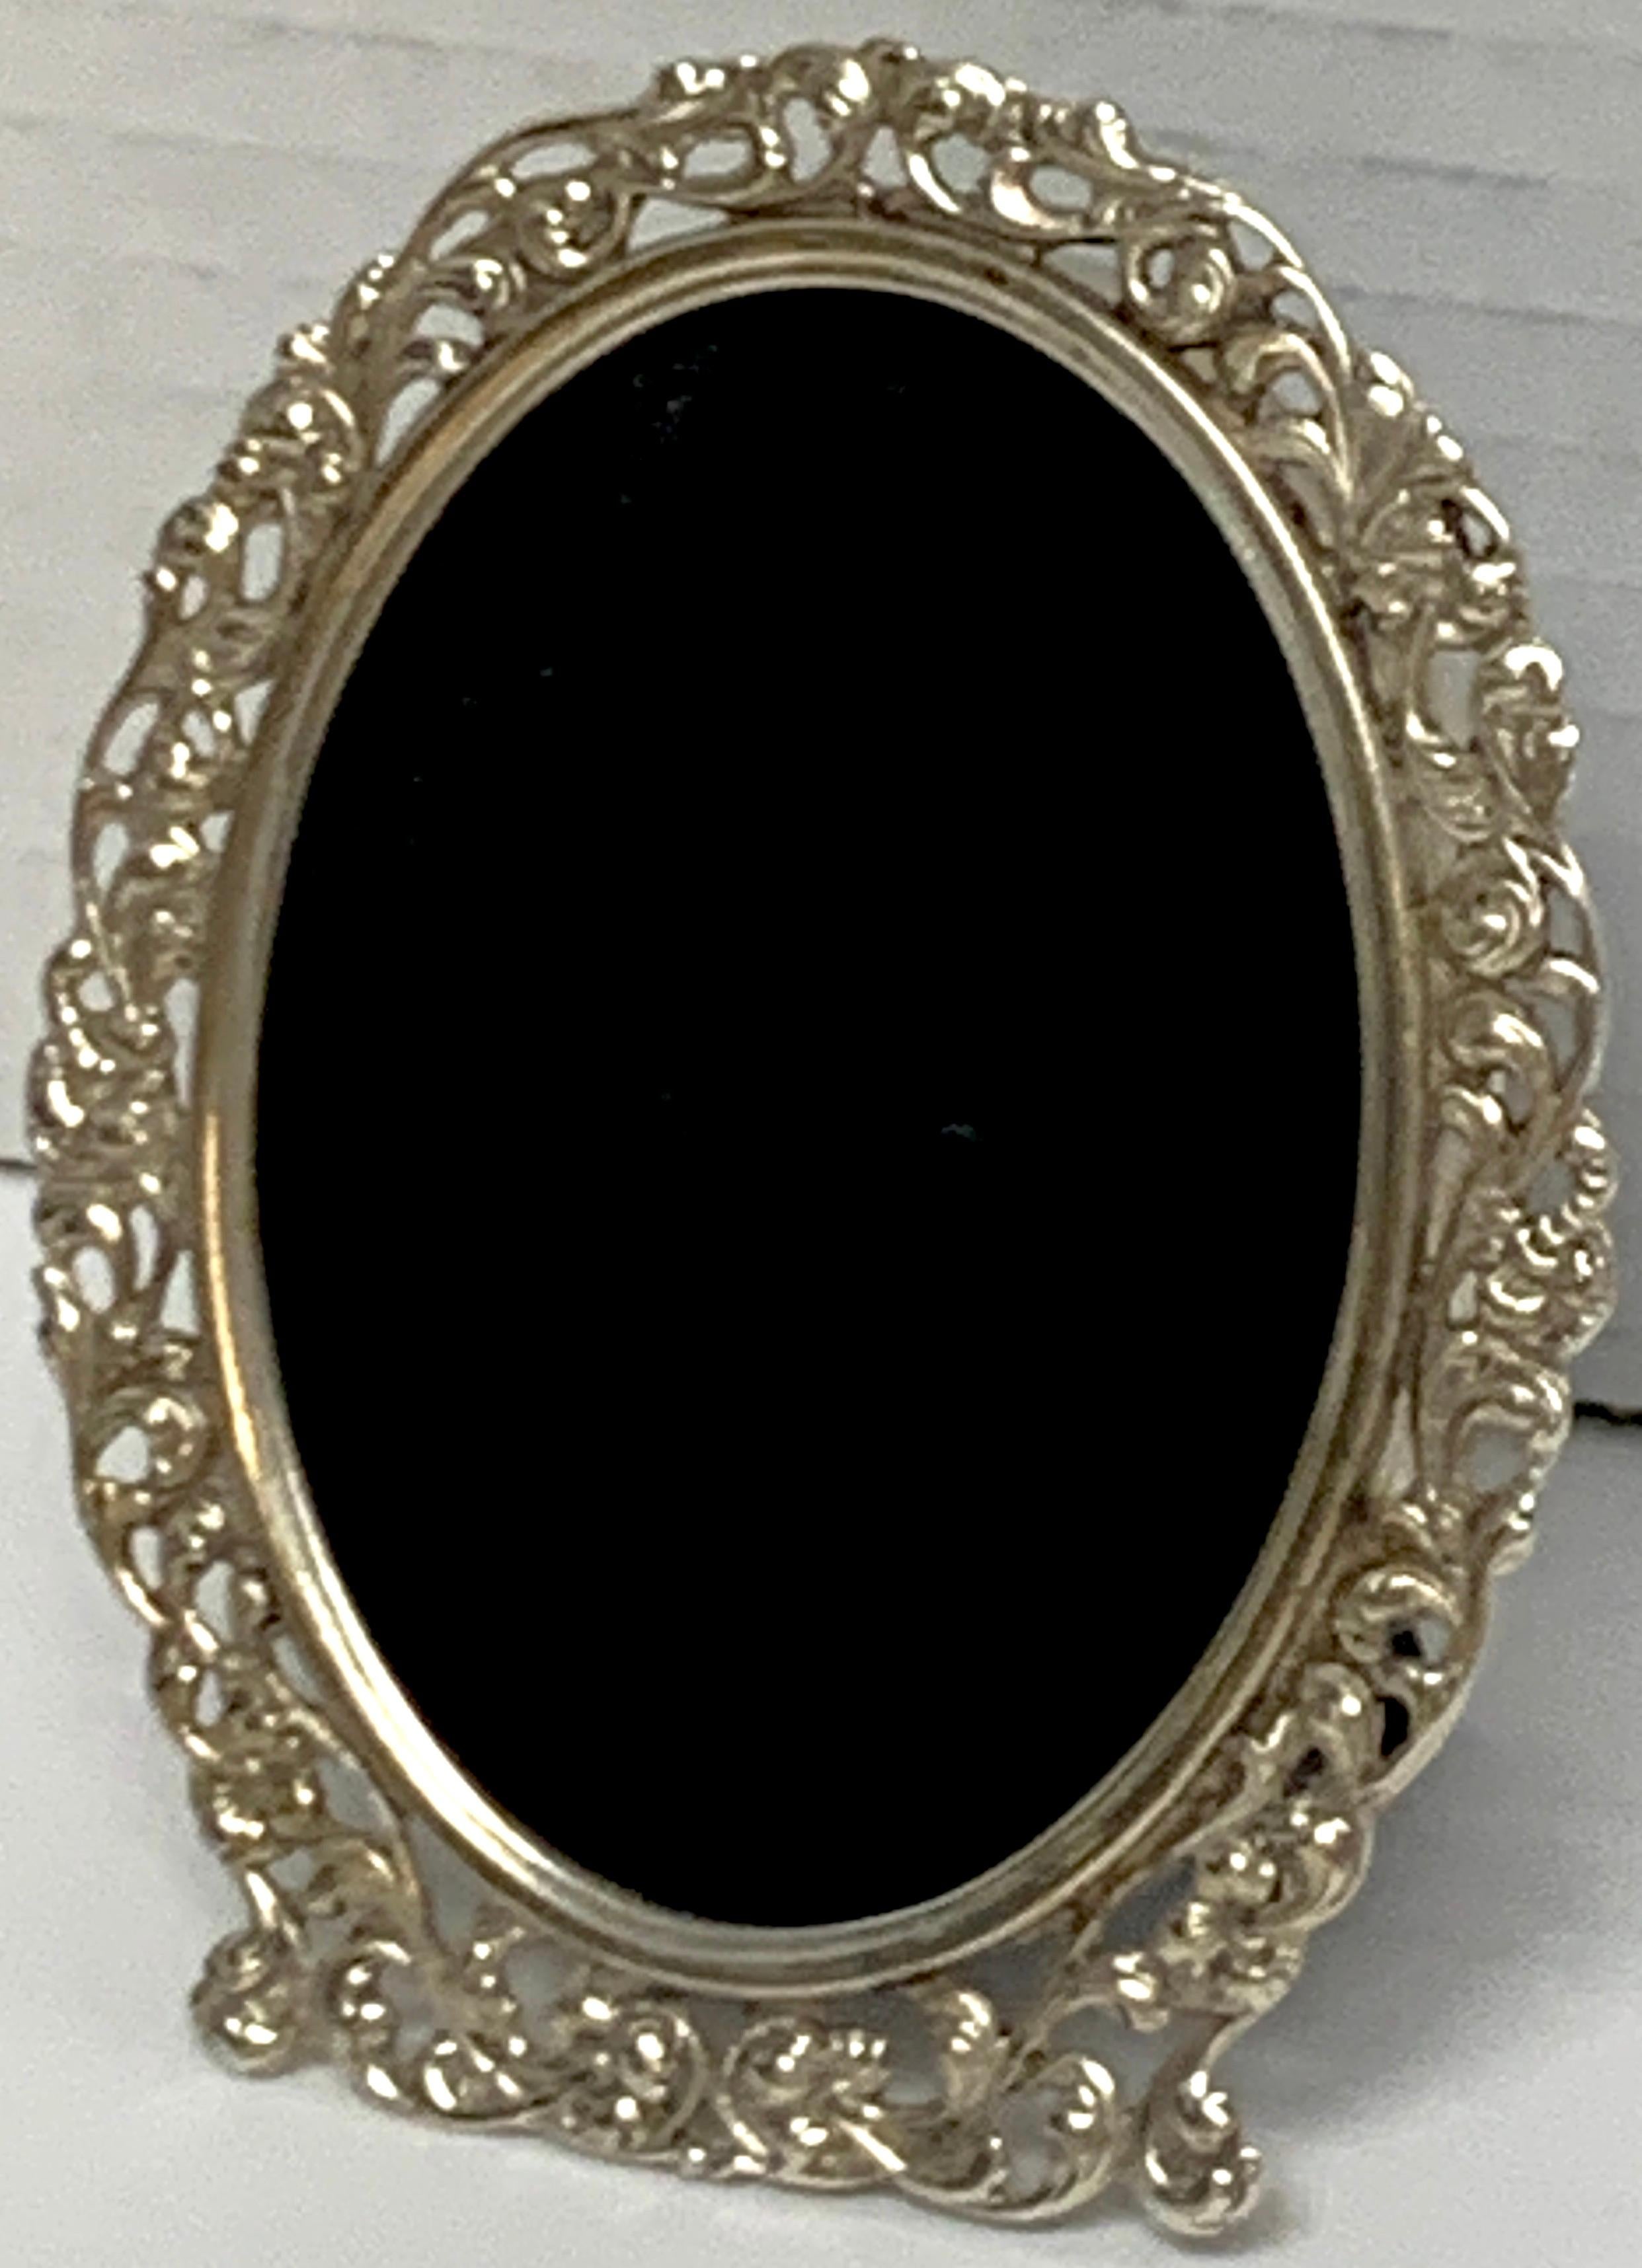 Diminutive continental pierced sterling oval frame, with convex glass and lacquered wood backing. Holds a 2-inch x 2.25-inch photograph.